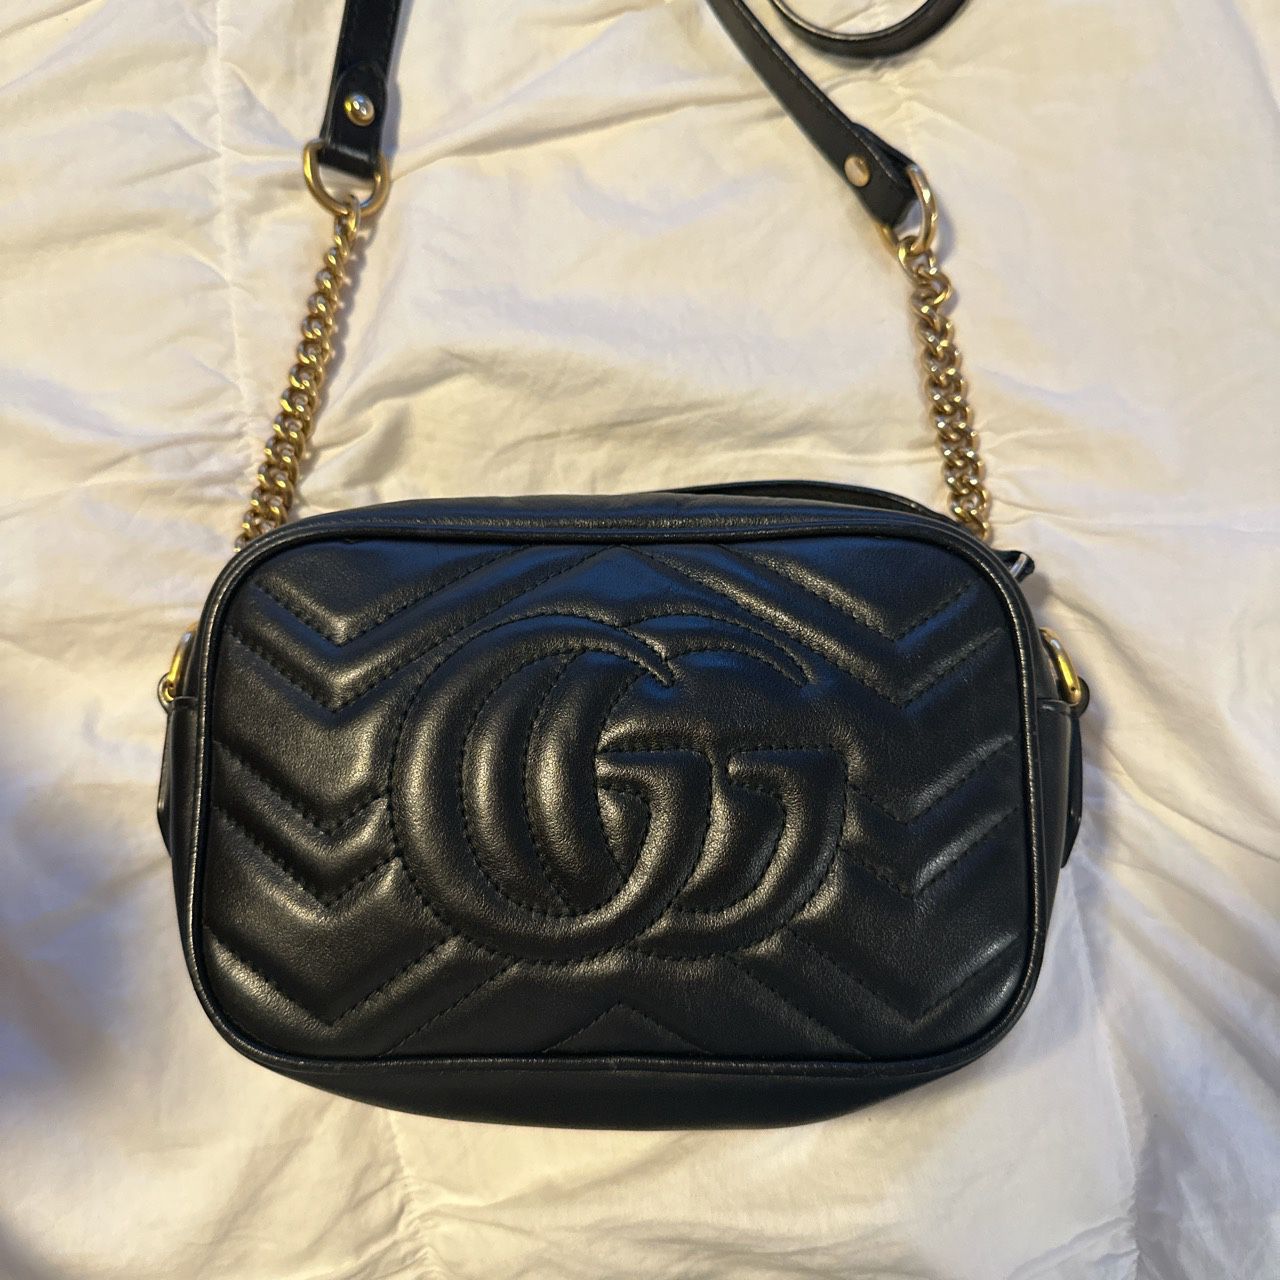 Gucci Marmont Nude Bag 446744 22x13x6cm for Sale in Yonkers, NY - OfferUp